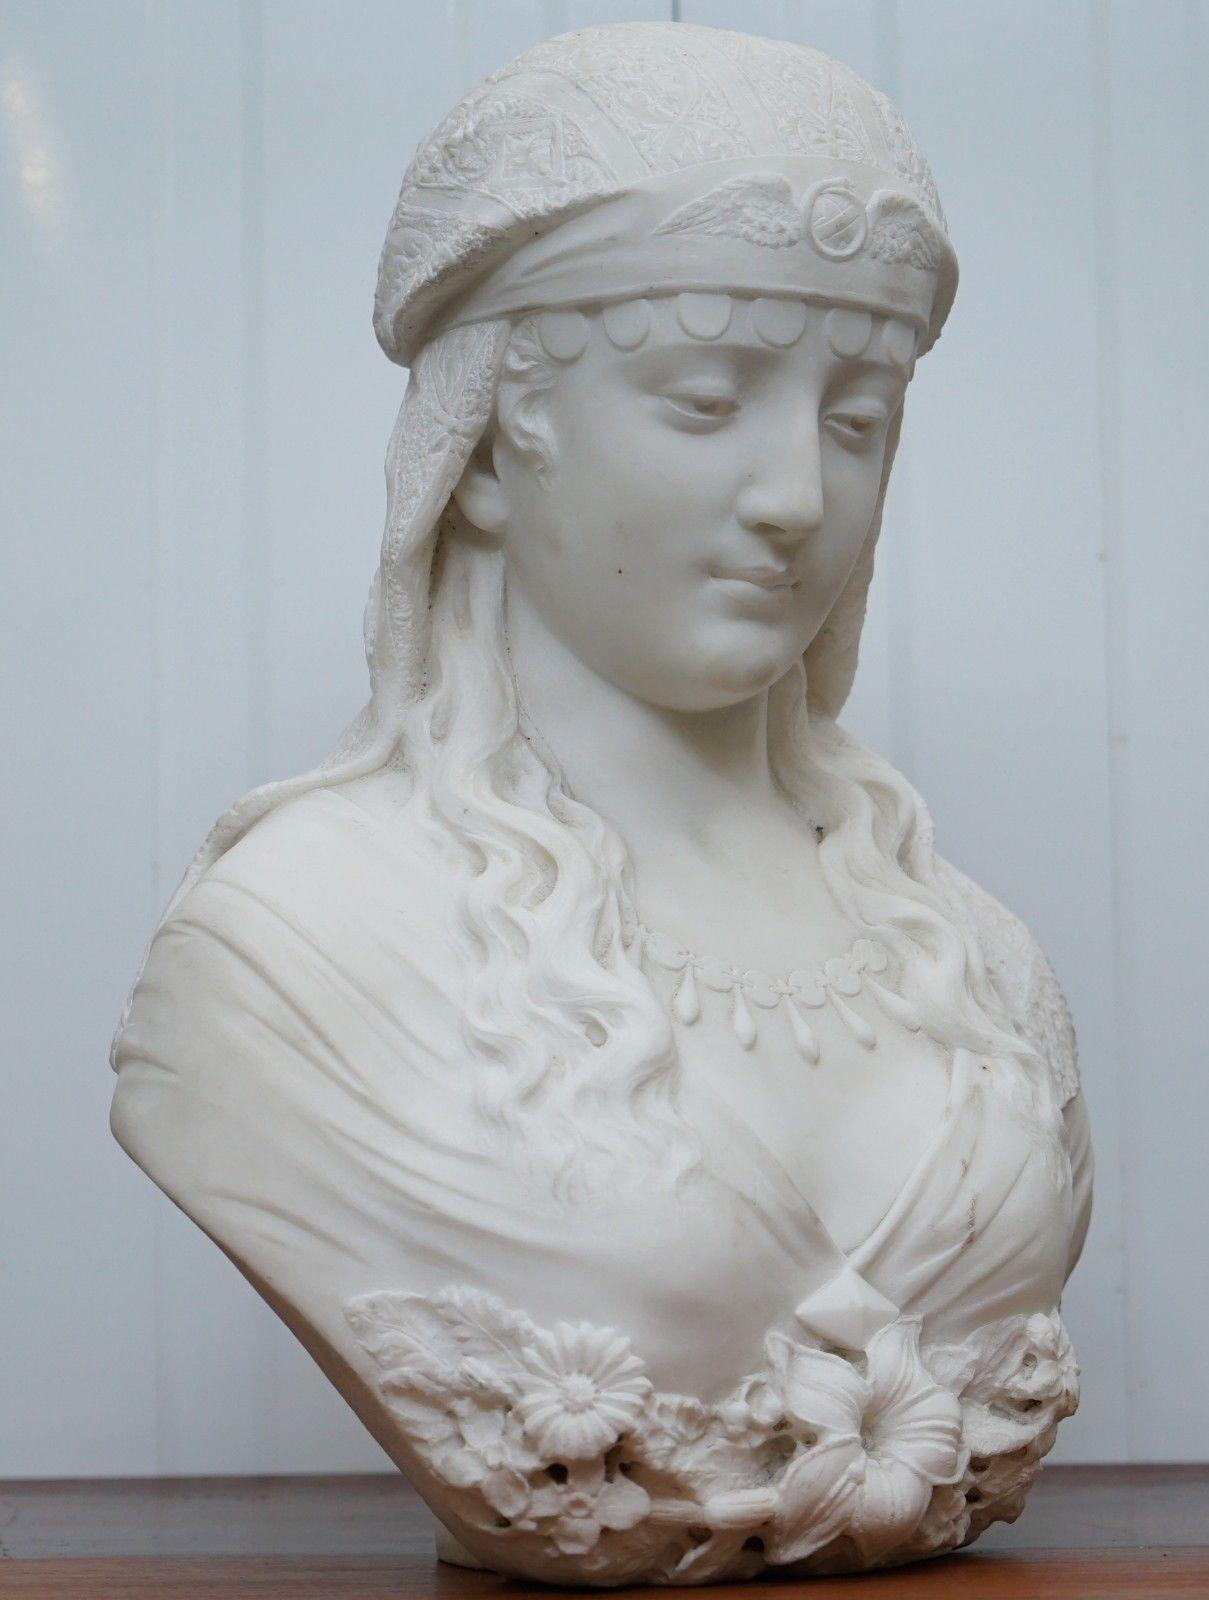 We are delighted to offer for sale this rare and quite exquisite original 19th century Ferdinando Vichi 1875-1945 Italian white marble bust titled Egyptian Beauty or Princess 

A very romantic and idyllic looking piece, the expression on the good